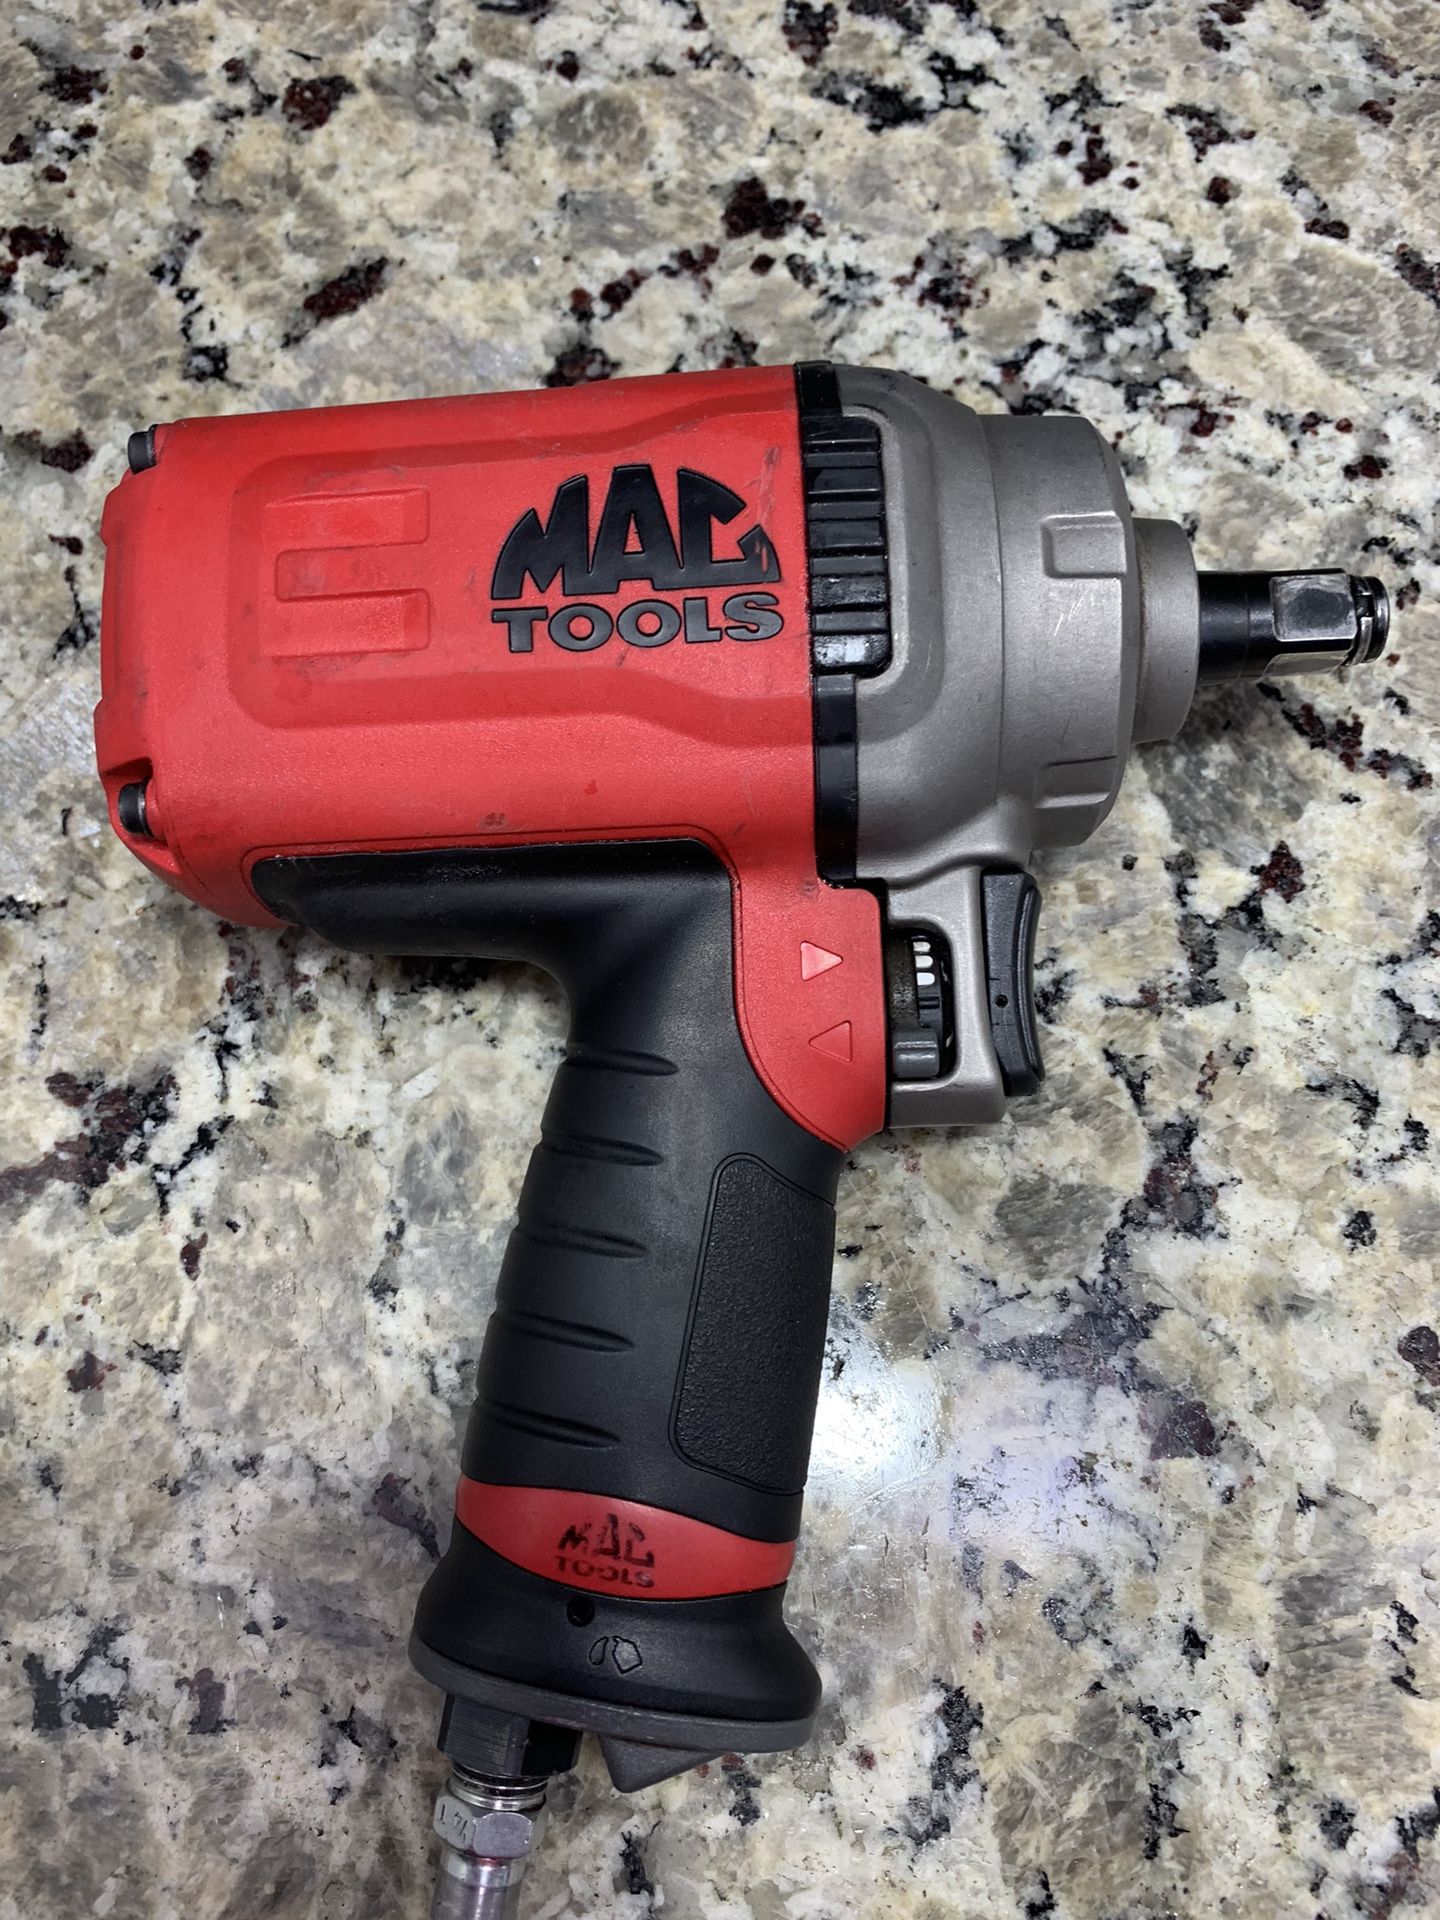 Impact Wrench  1/2” Drive 